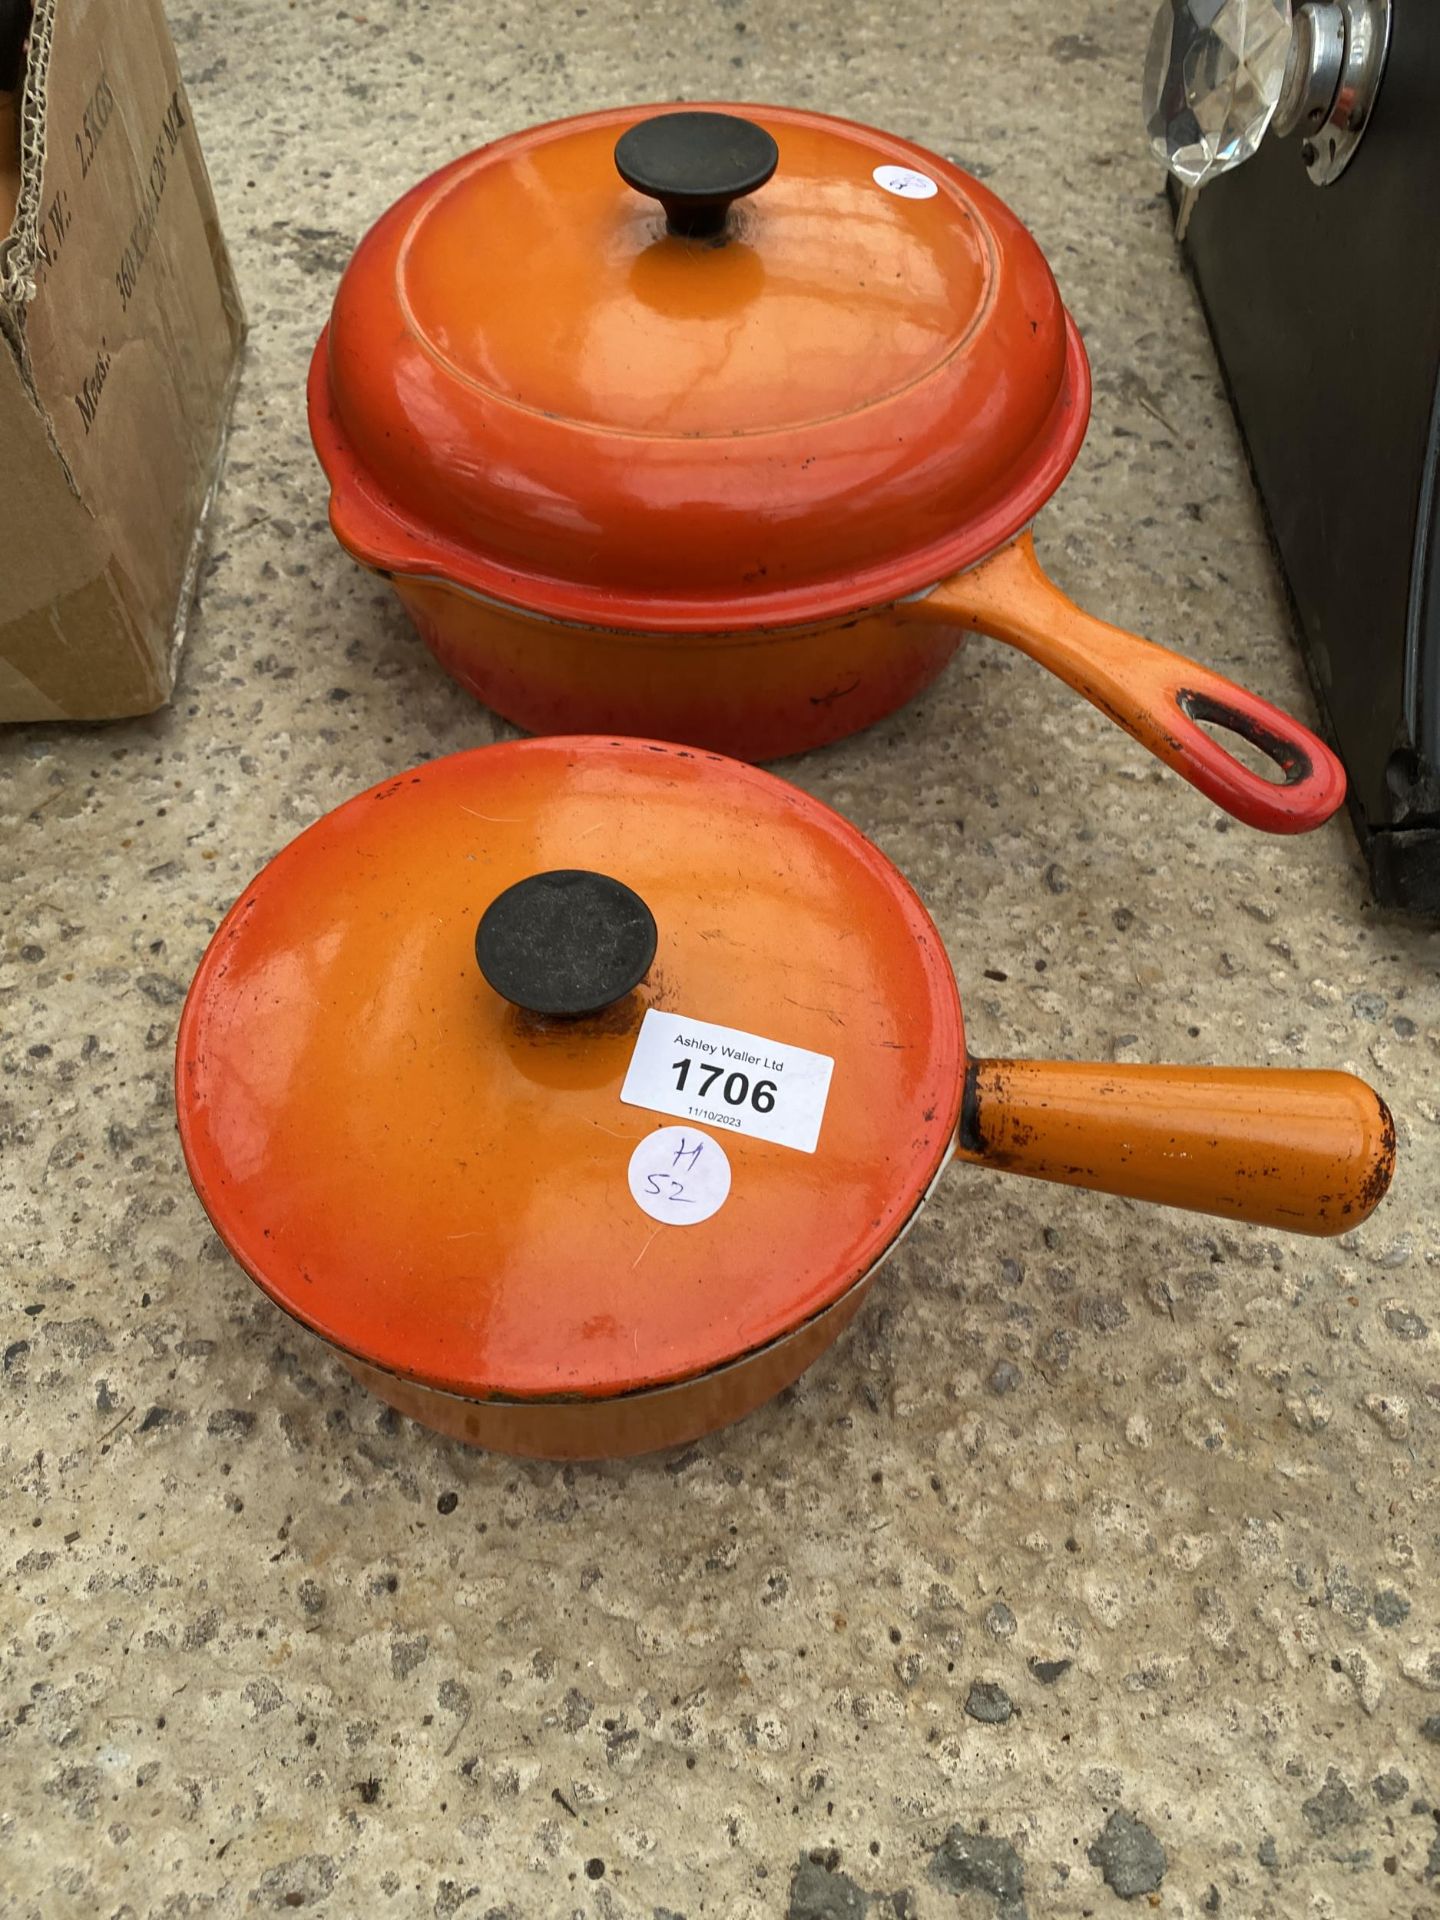 TWO VINTAGE ORANGE CAST IRON COOKING PANS, ONE LABELED LE CREUSET